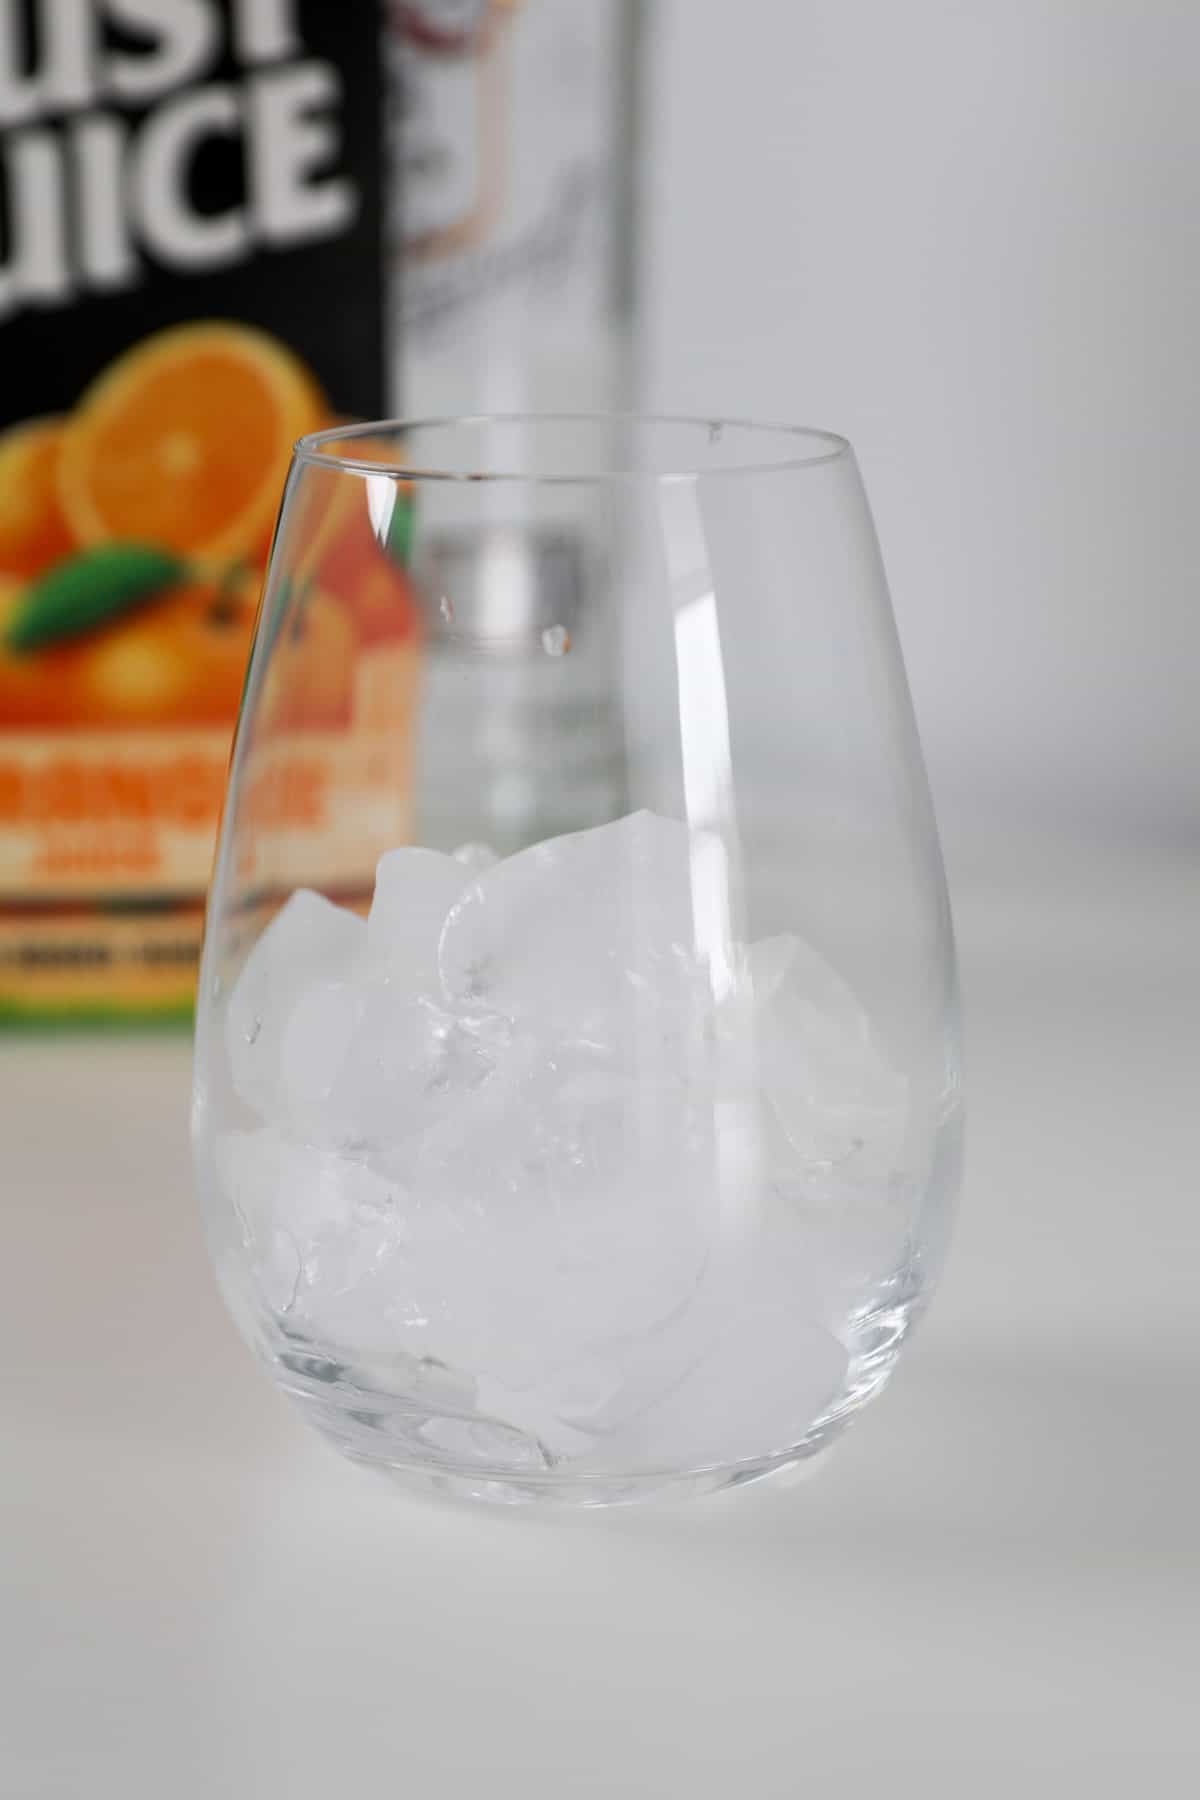 Ice in a glass tumbler.